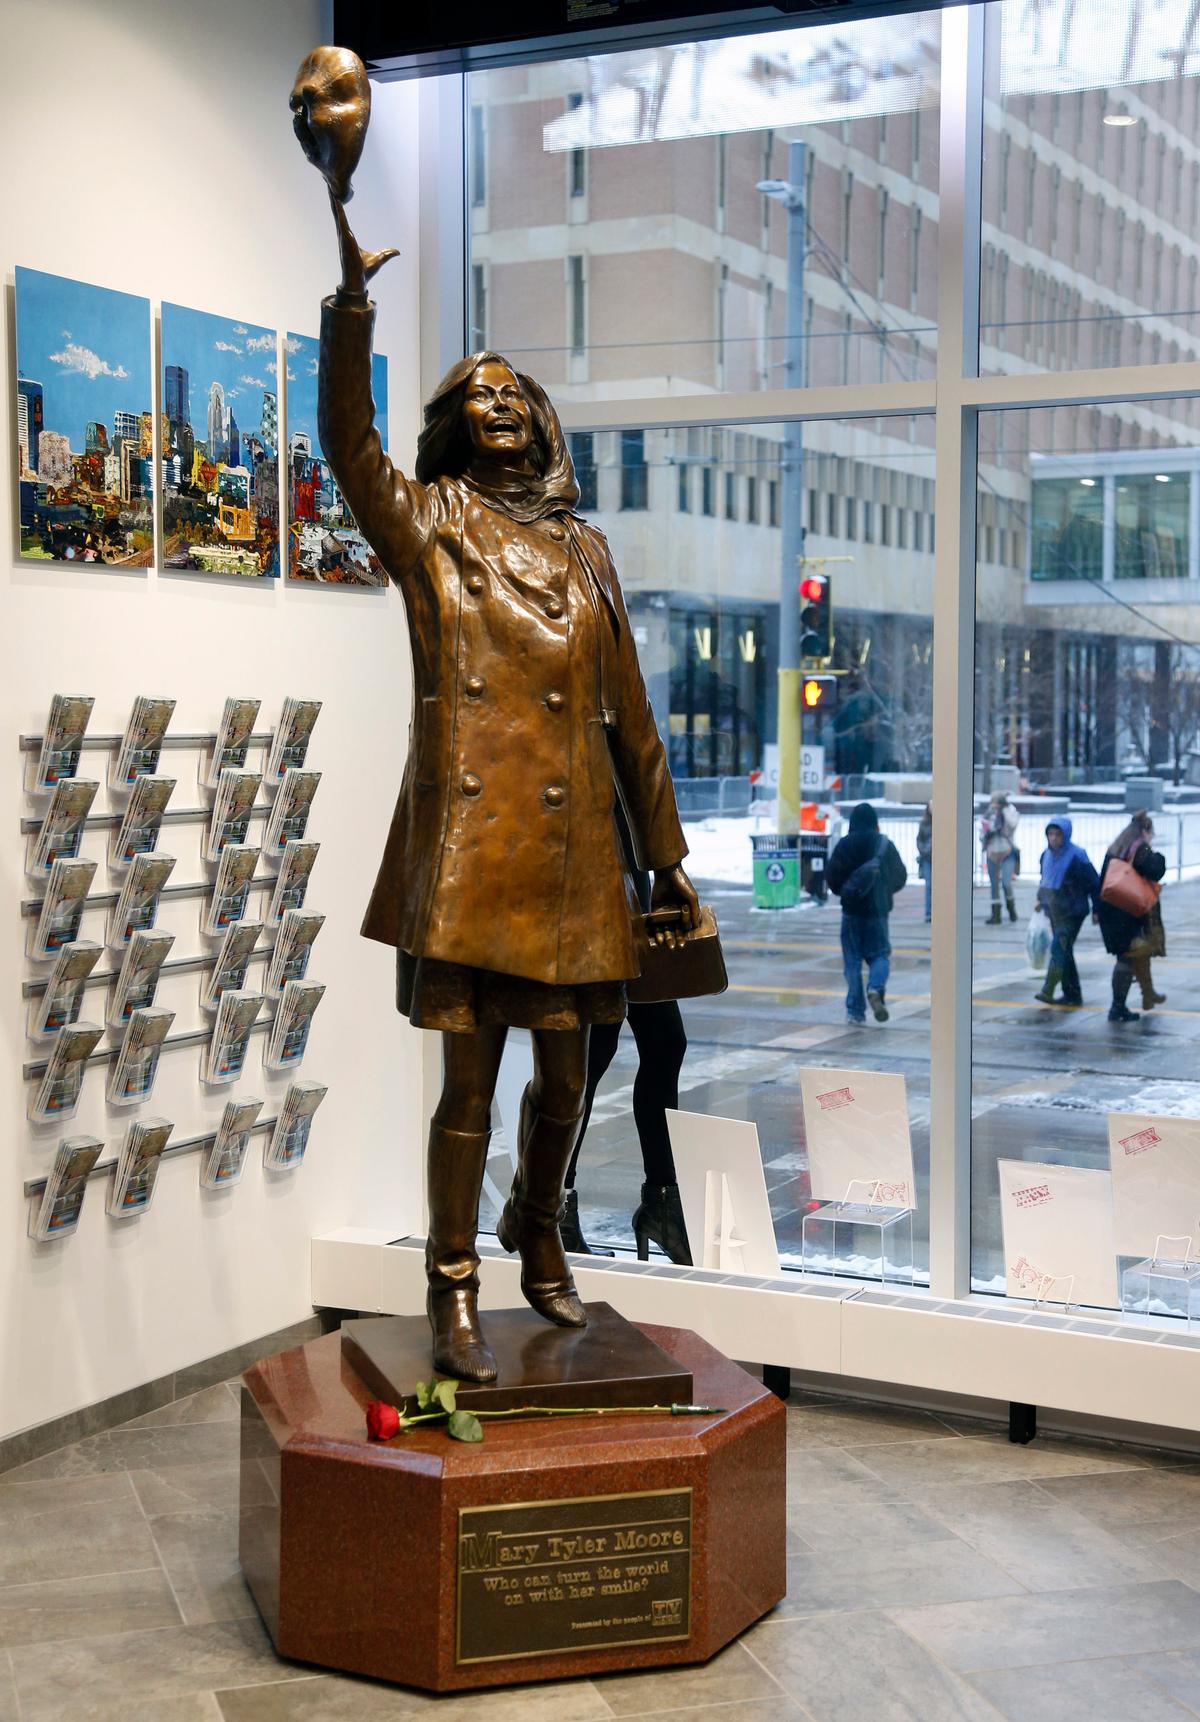 Life-size bronze statue of Mary Tyler Moore at the Minneapolis Visitor Center. (AP Photo/Jim Mone)